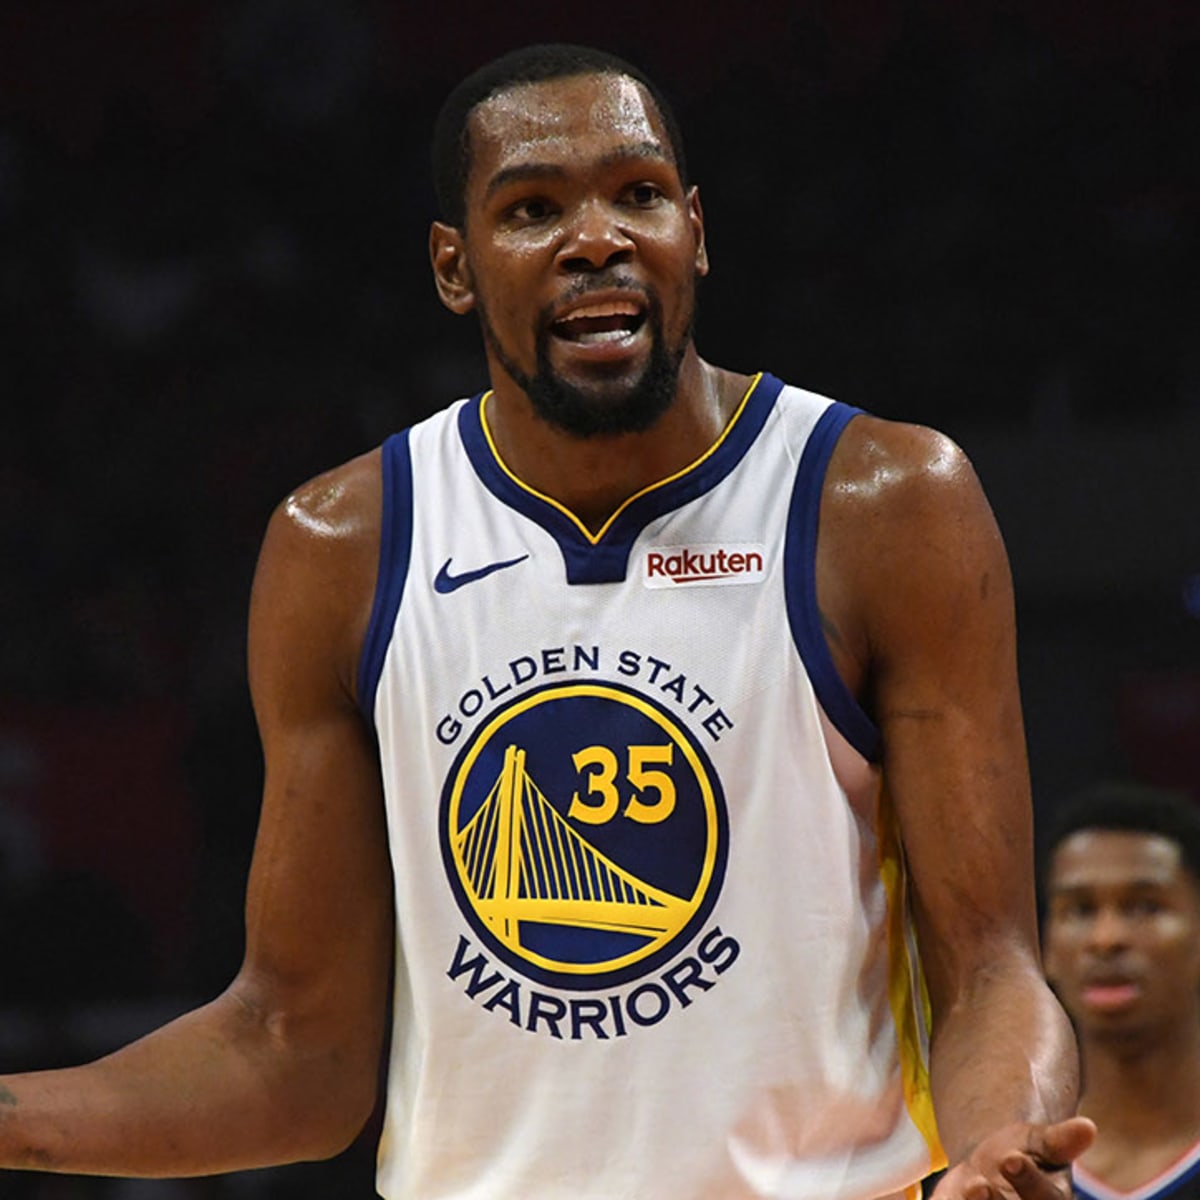 Kevin Durant height: Now listed at 6' 9 1/2 by Nets - Sports